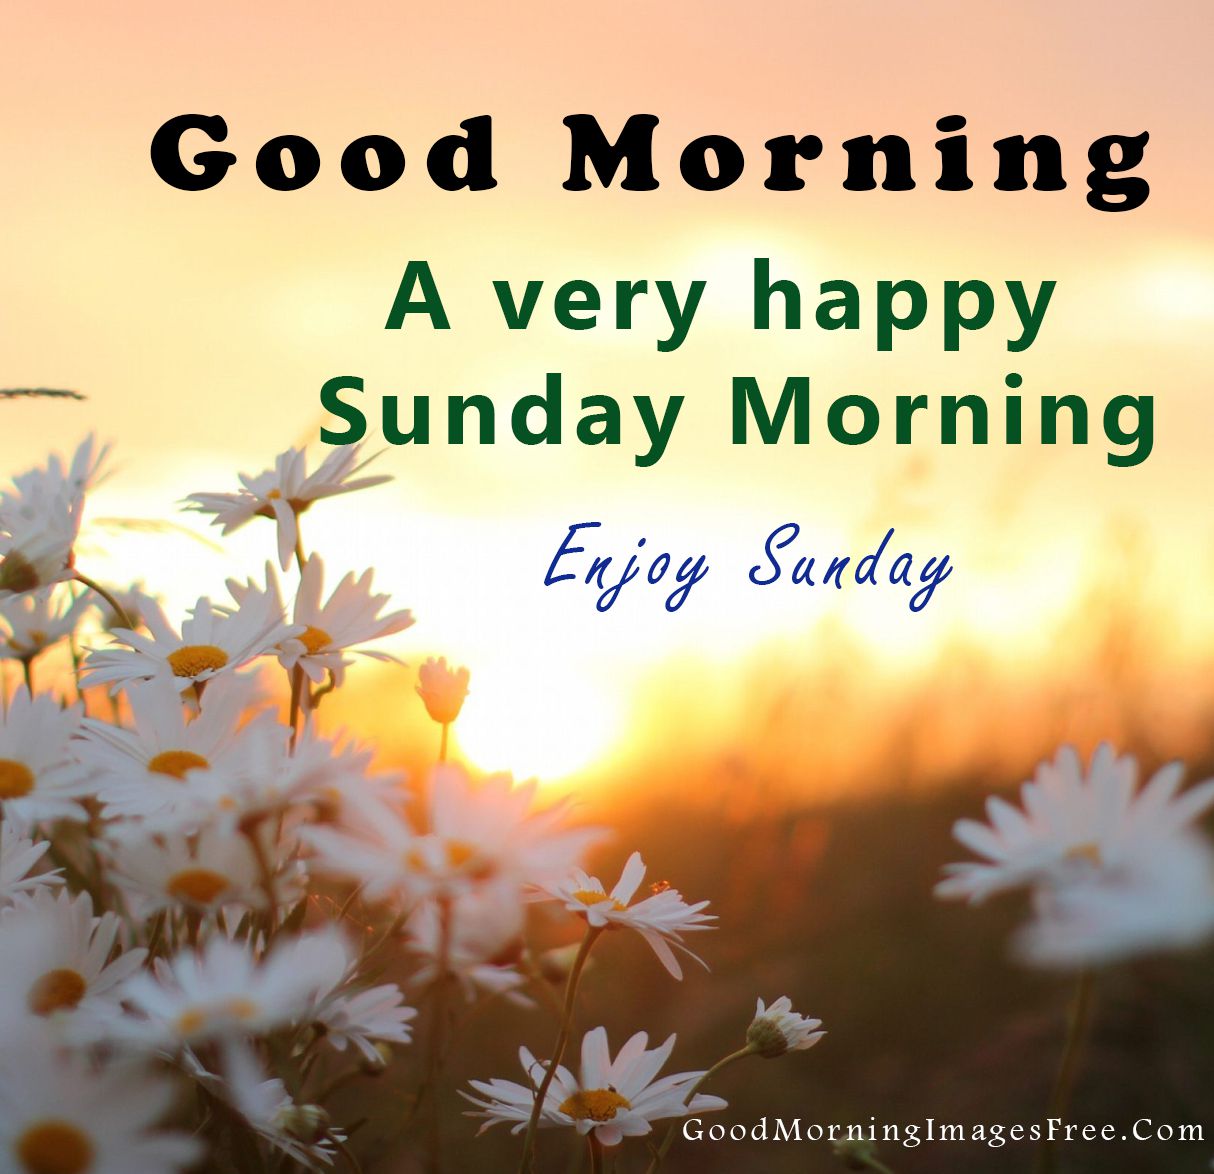 81+ Happy Sunday Good Morning Images Photos HD Download